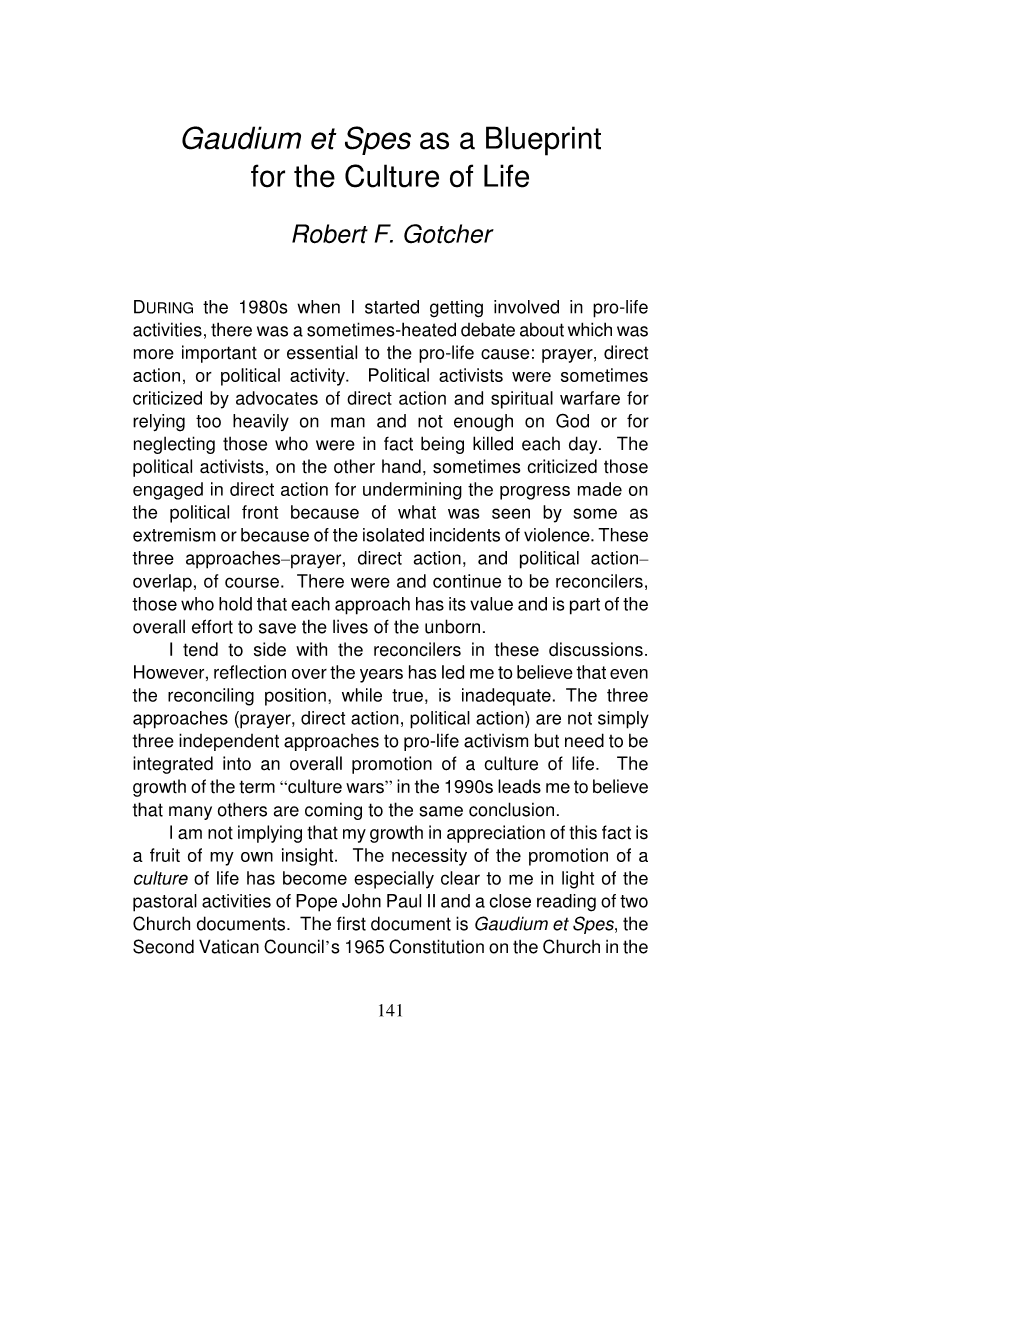 Gaudium Et Spes As a Blueprint for the Culture of Life